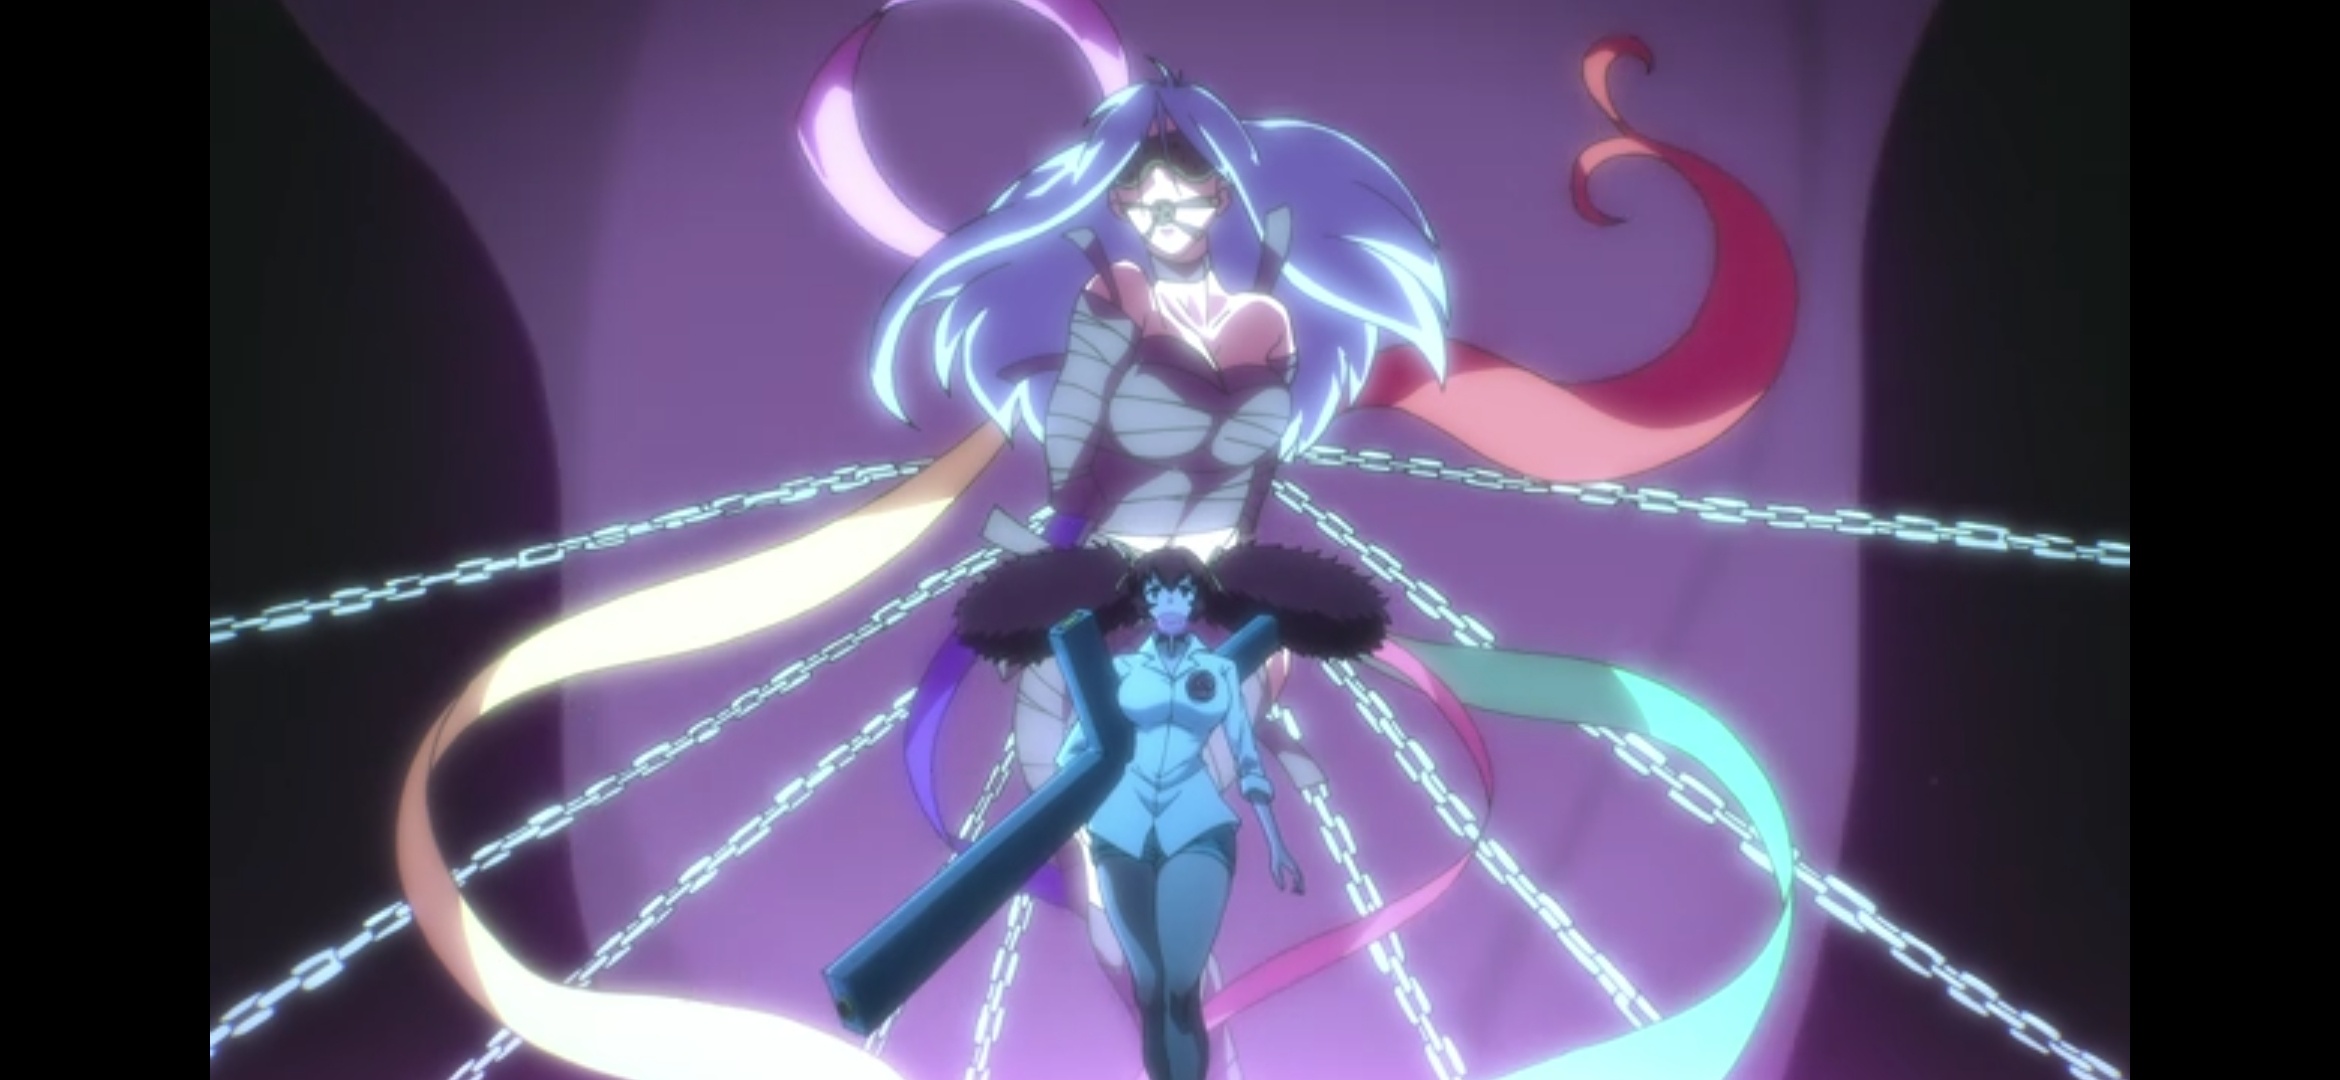 Charyeok Unleashed! God of High School Episode 7 Review: anima